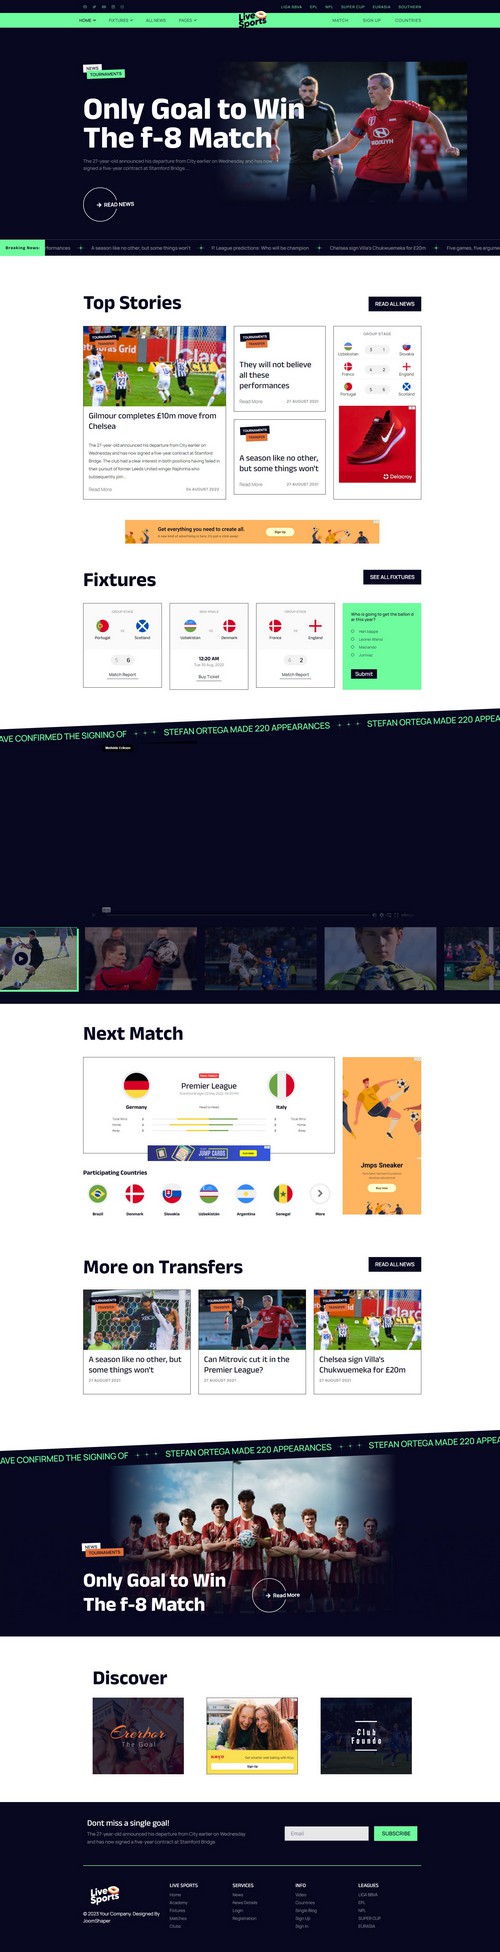 Live Sports - All-in-one Joomla Template for Sports Websites